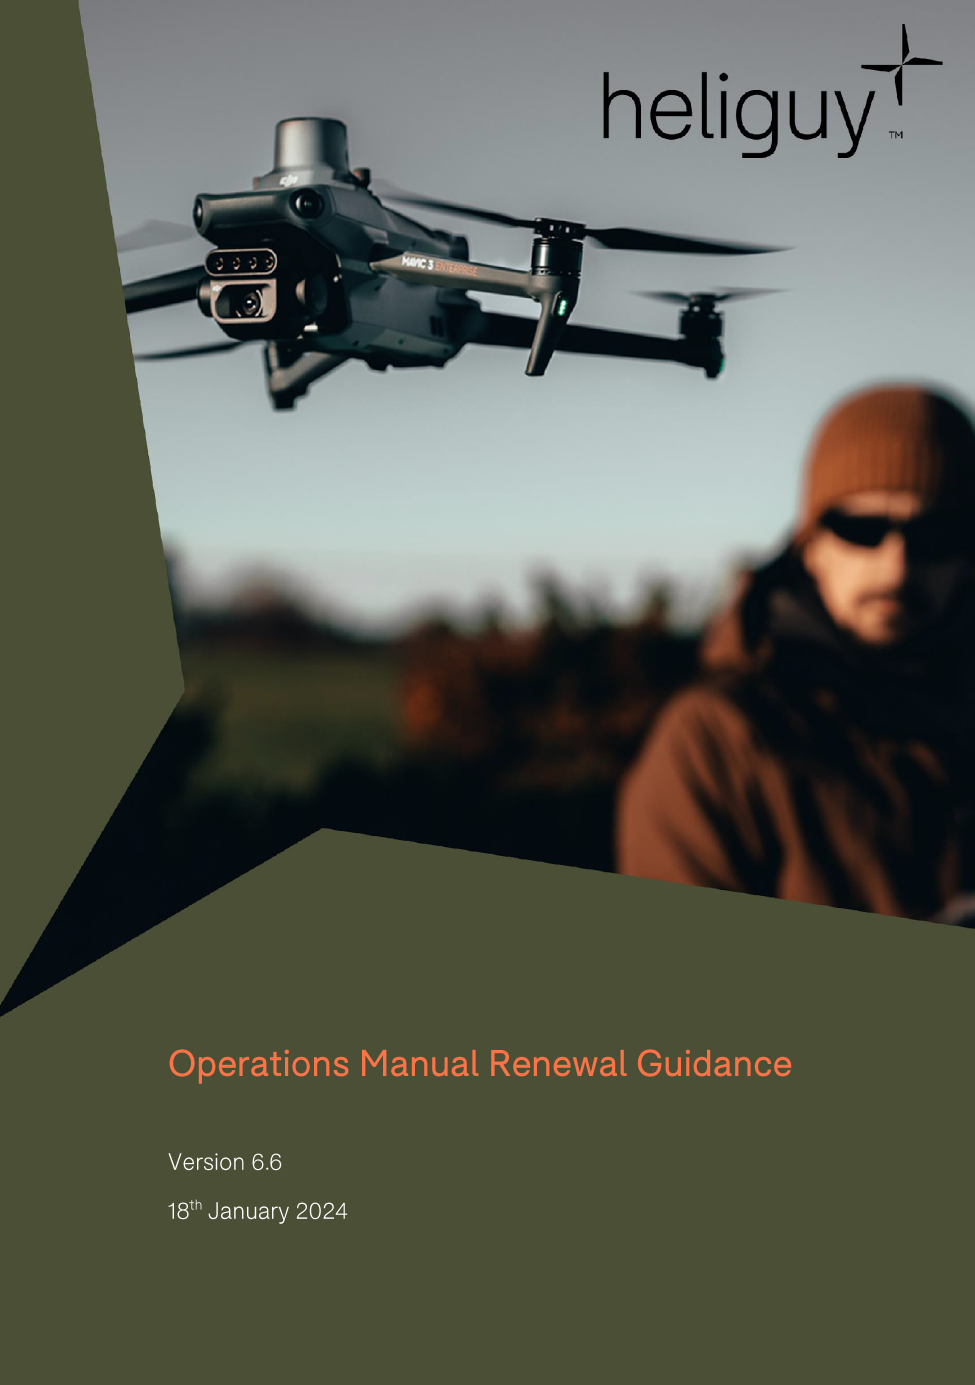 Ops Manual Guidance version 6.6